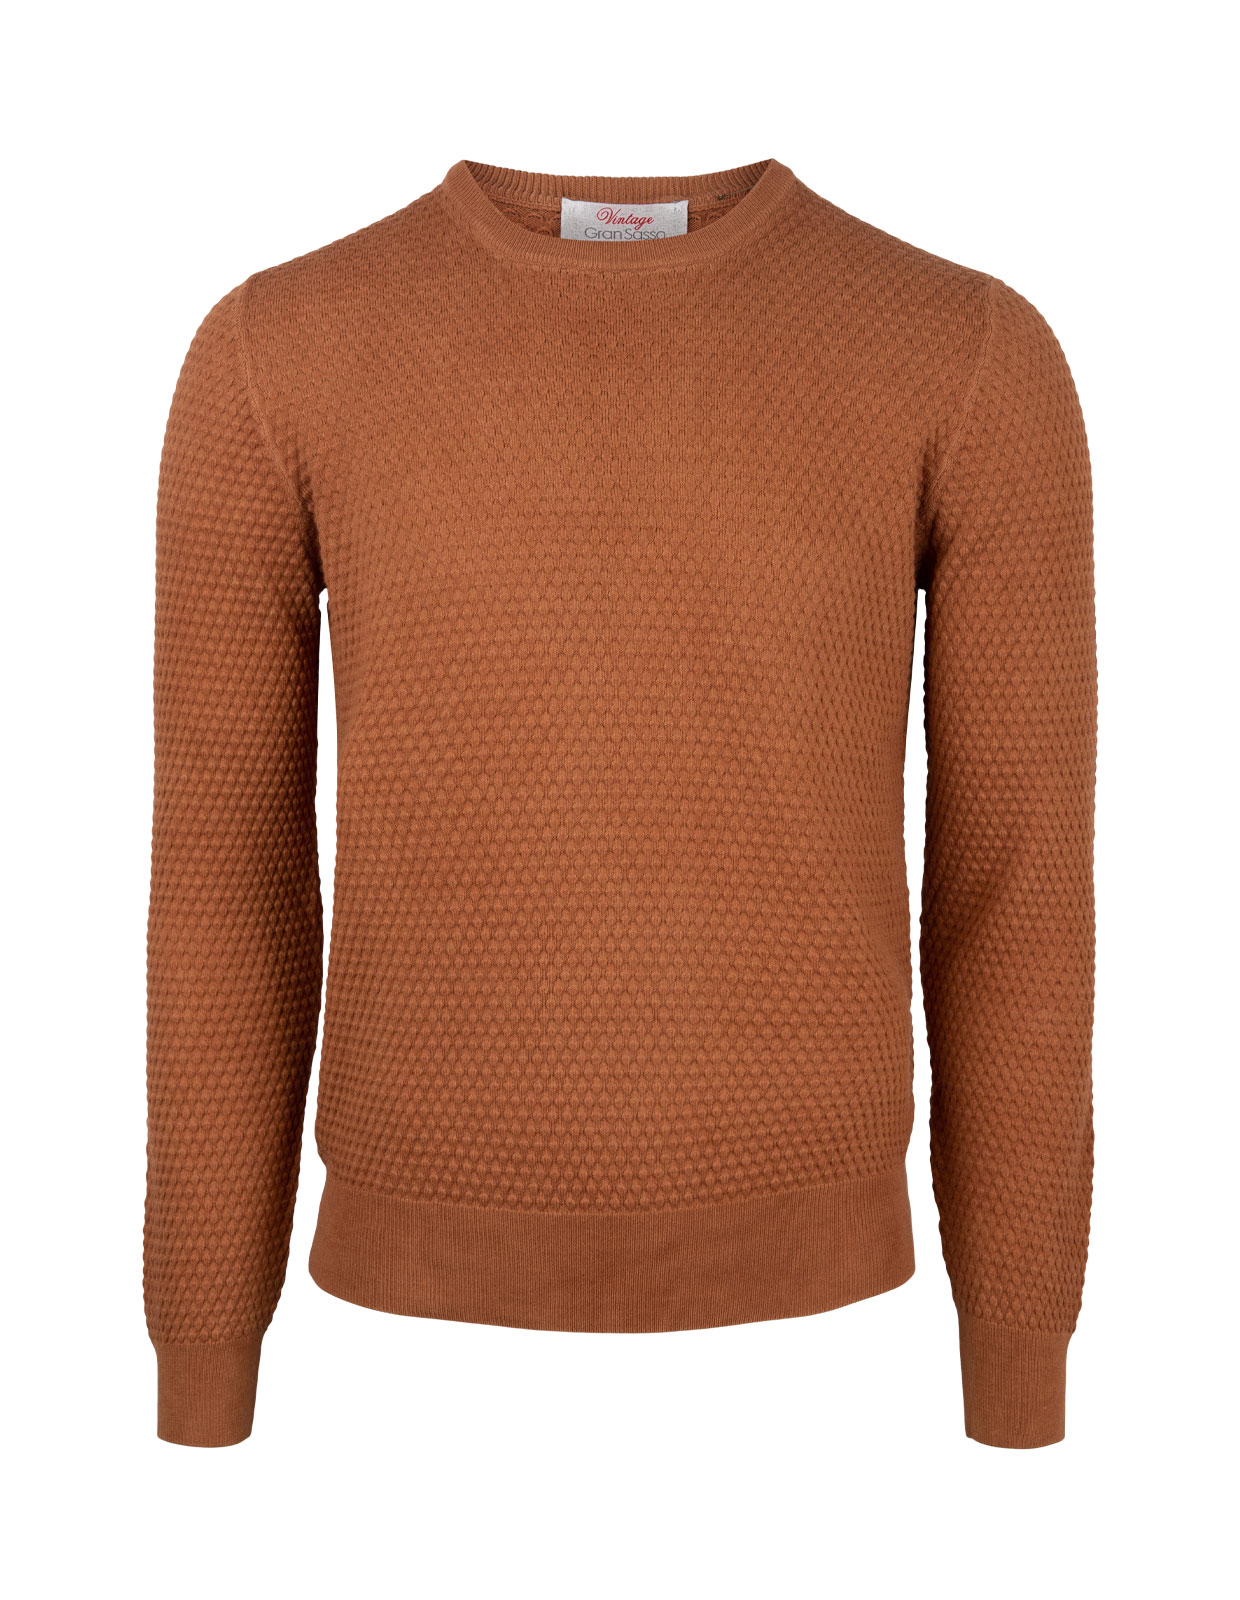 Crew Neck Knitted Texture Cotton Tobacco